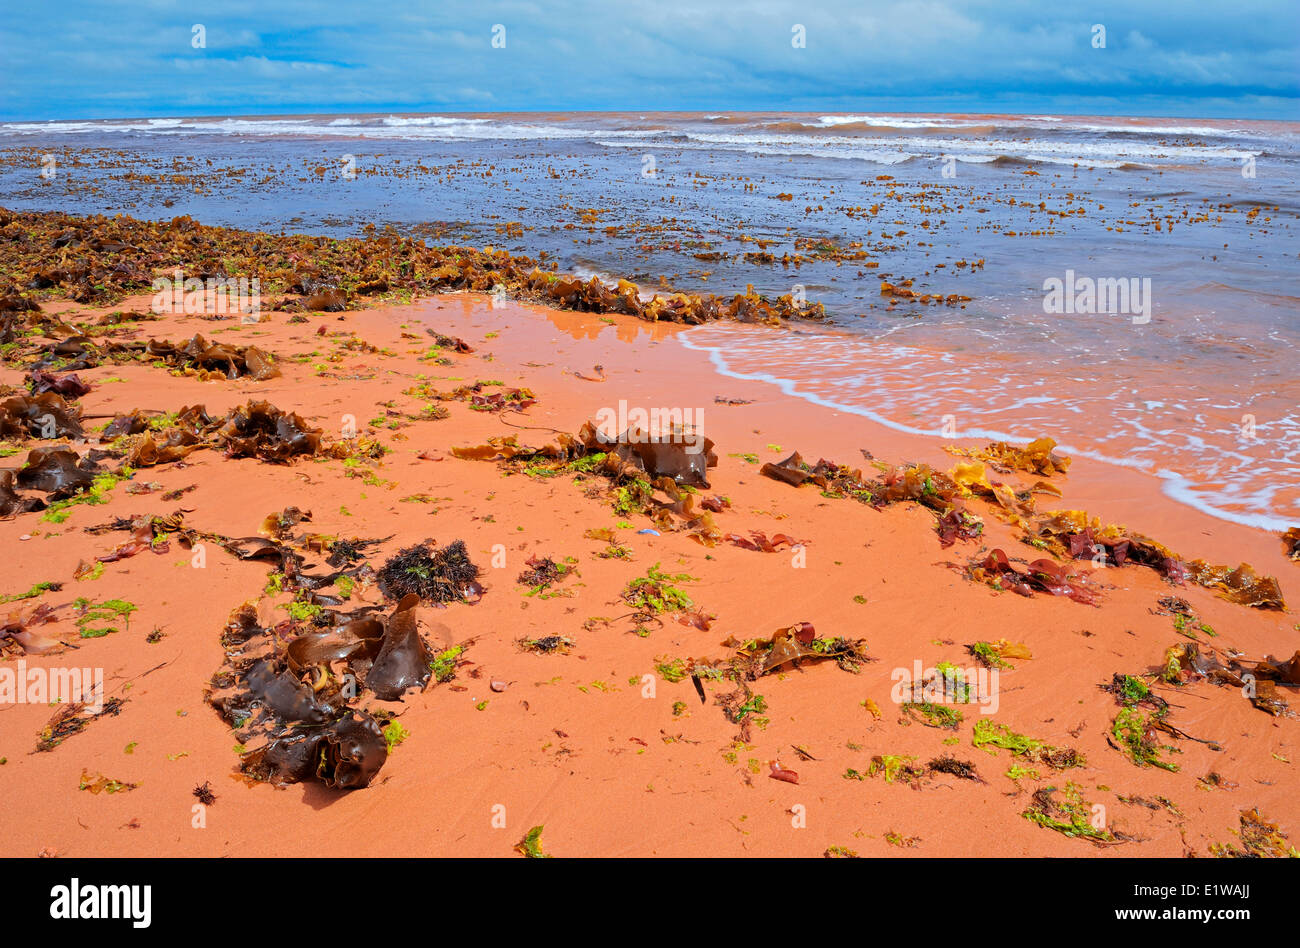 Seaweed, grass and rocks on red sand along the beach of the Gulf of St. Lawrence, Tignish Shore, Prince Edward Island, Canada Stock Photo